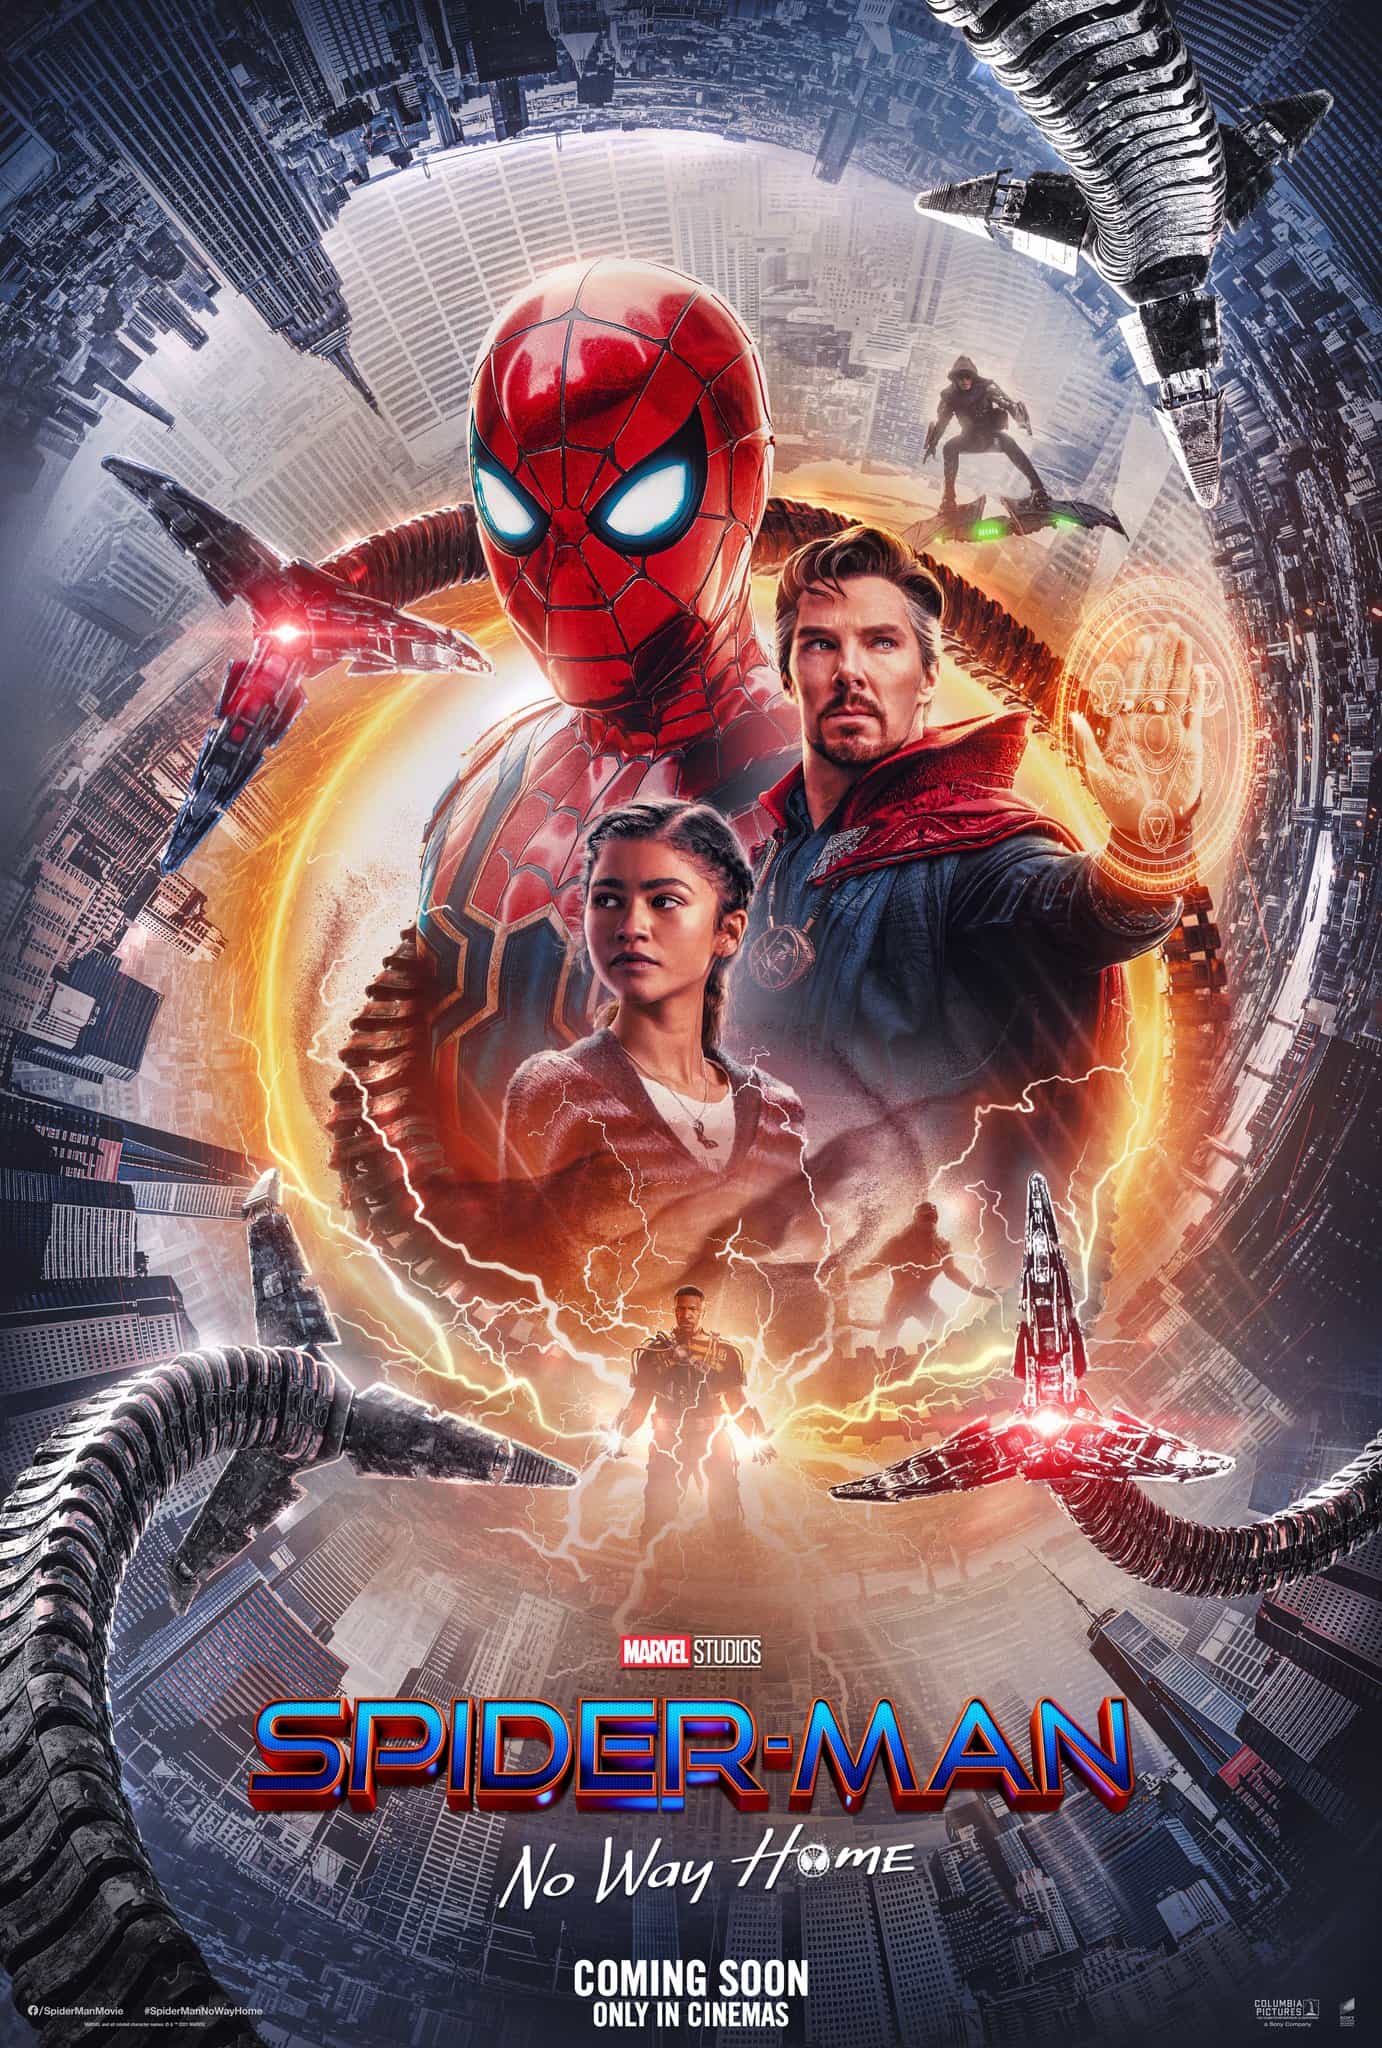 Top US Box Office Movies of 2021:  Spider-Man: No Way Home is the top movie of 2021 in North America